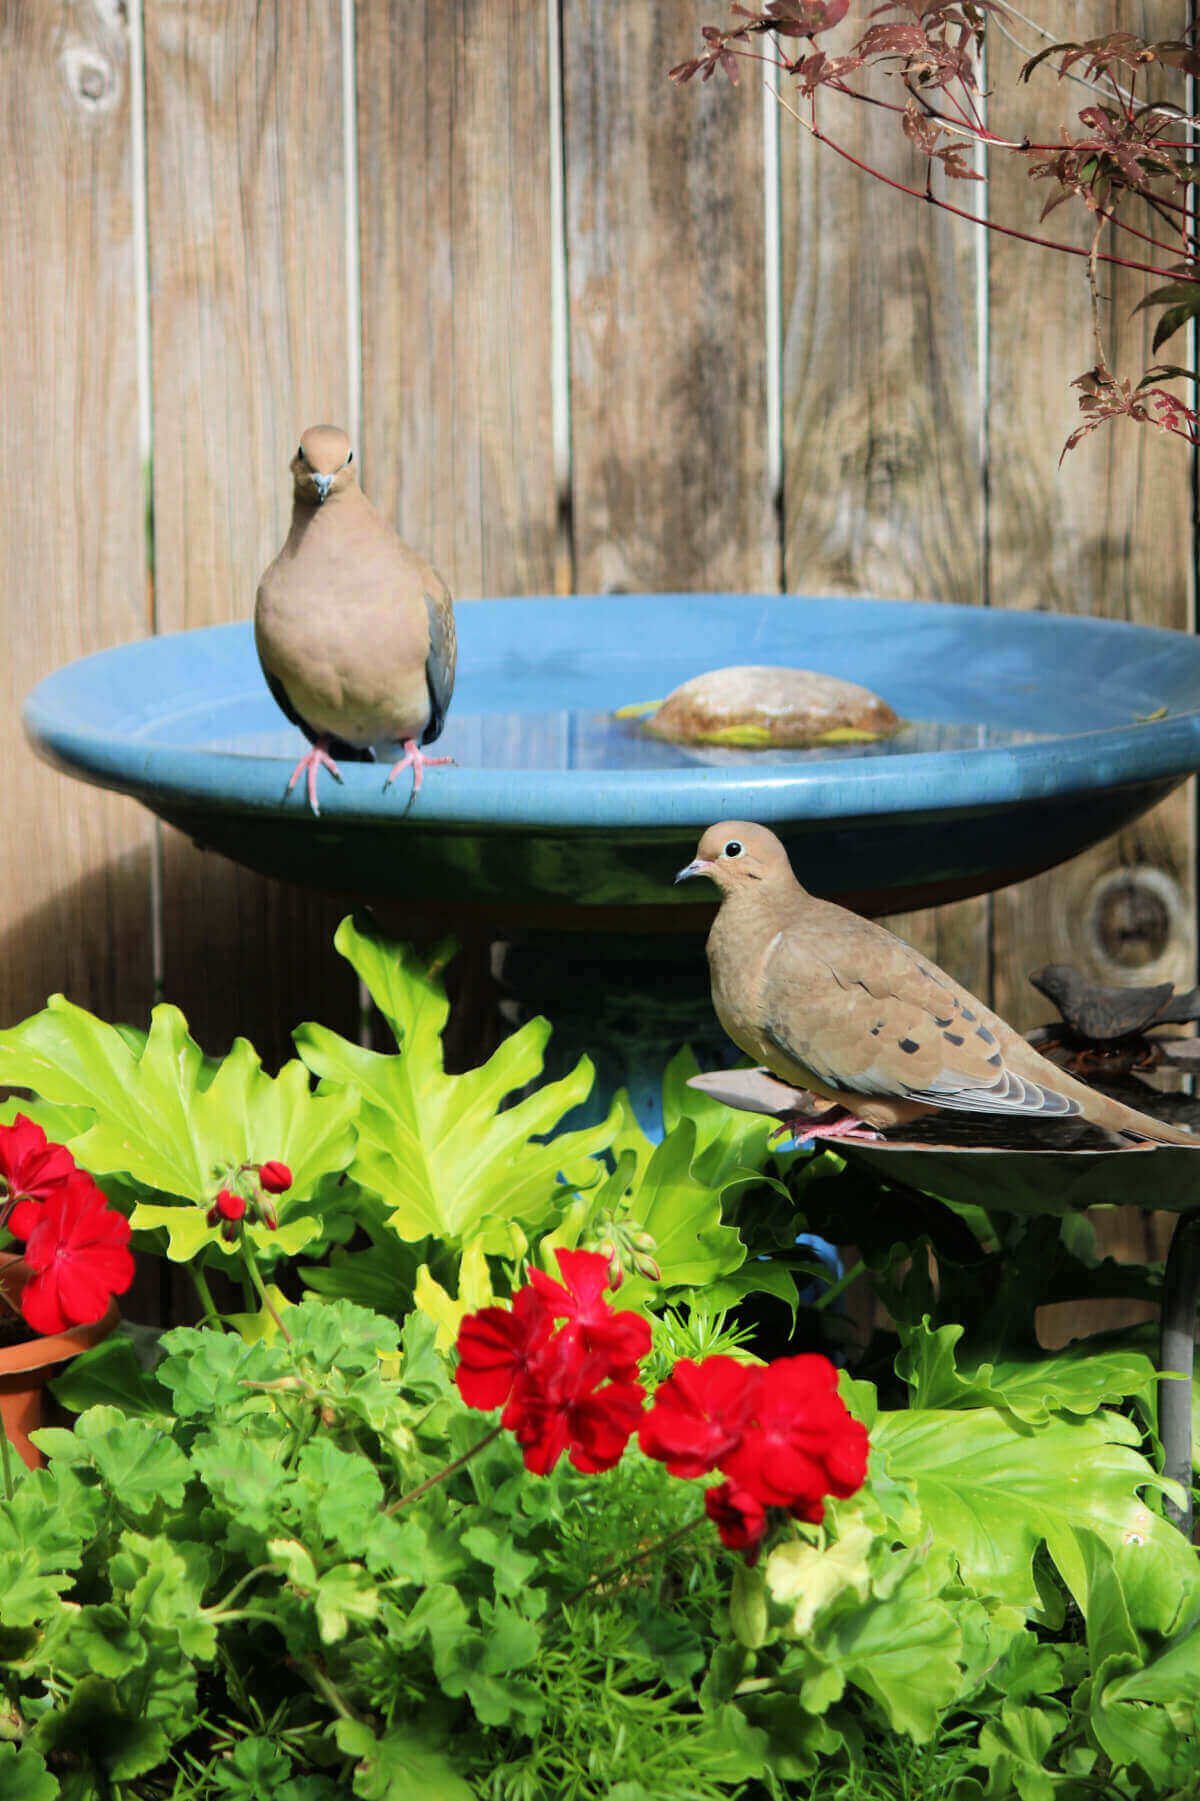 In Habits Of The Mourning Dove, this lists their common behavior